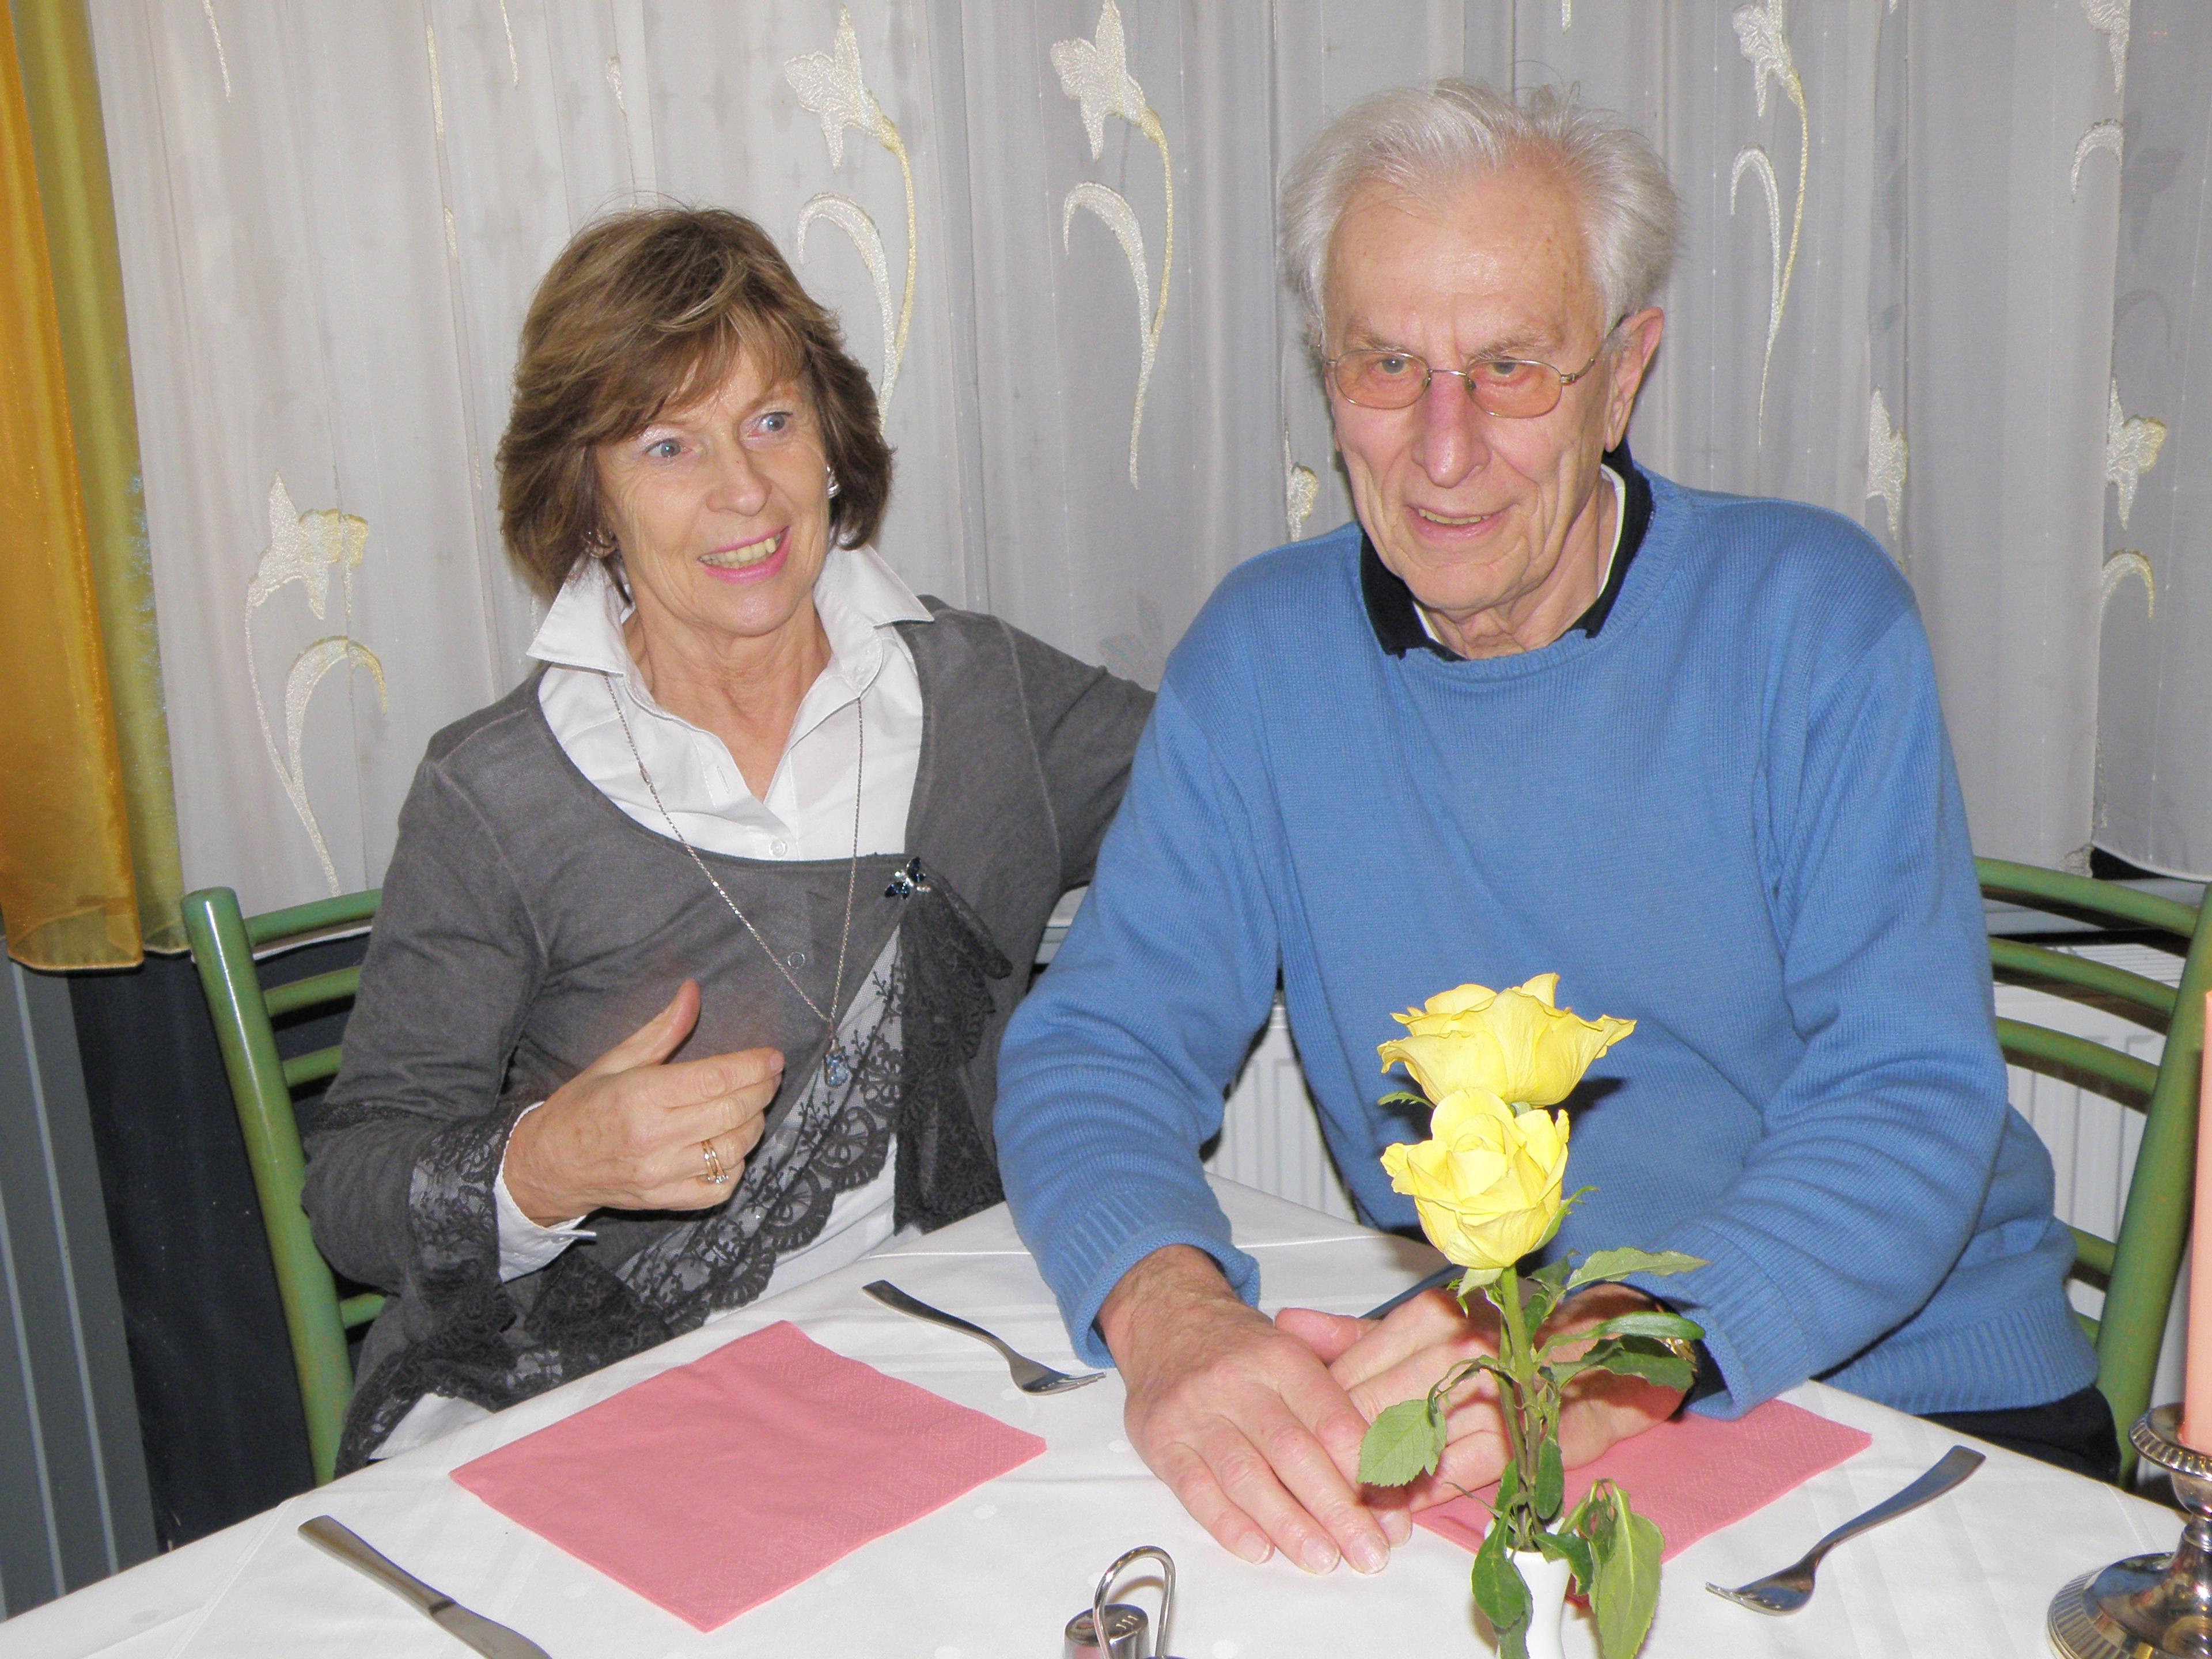 Harald and Dorothee on a restaurant celebrating his birthday February 14th, 2012